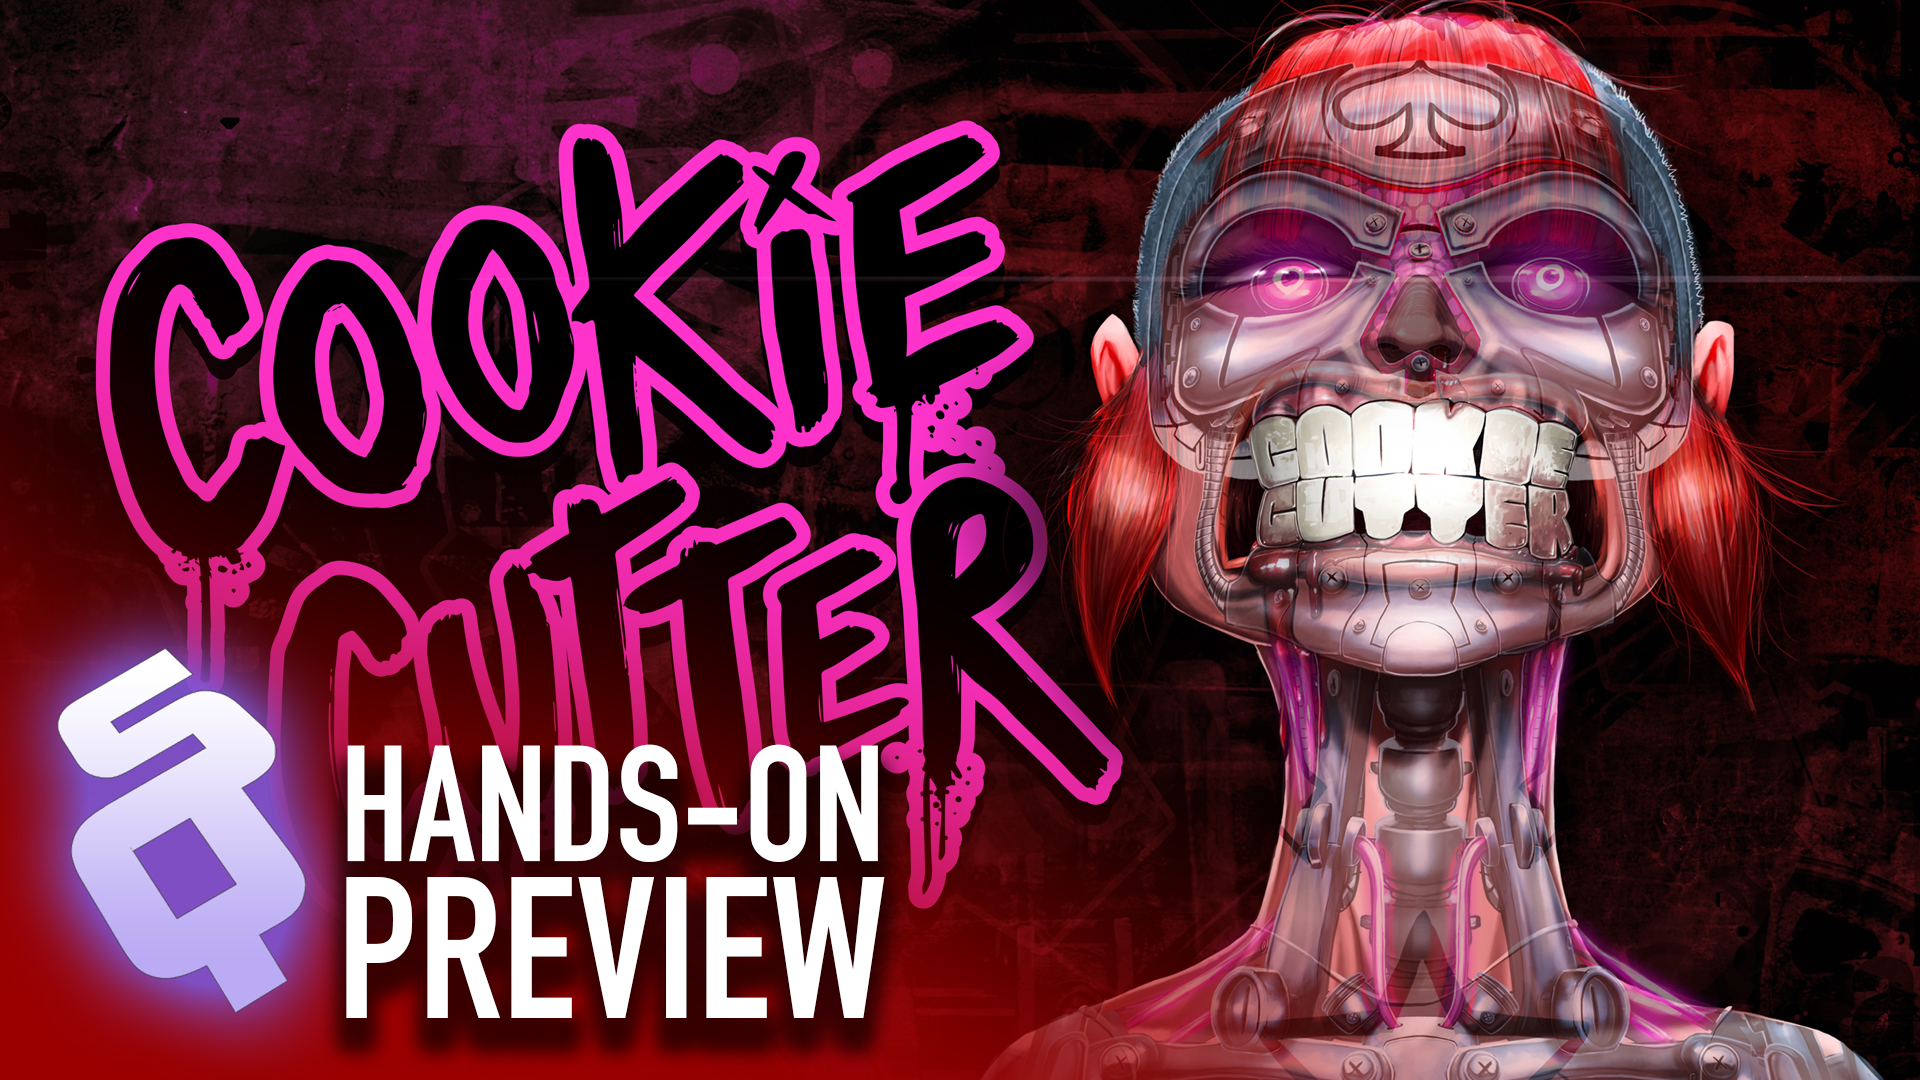 Hands-on Preview: Cookie Cutter